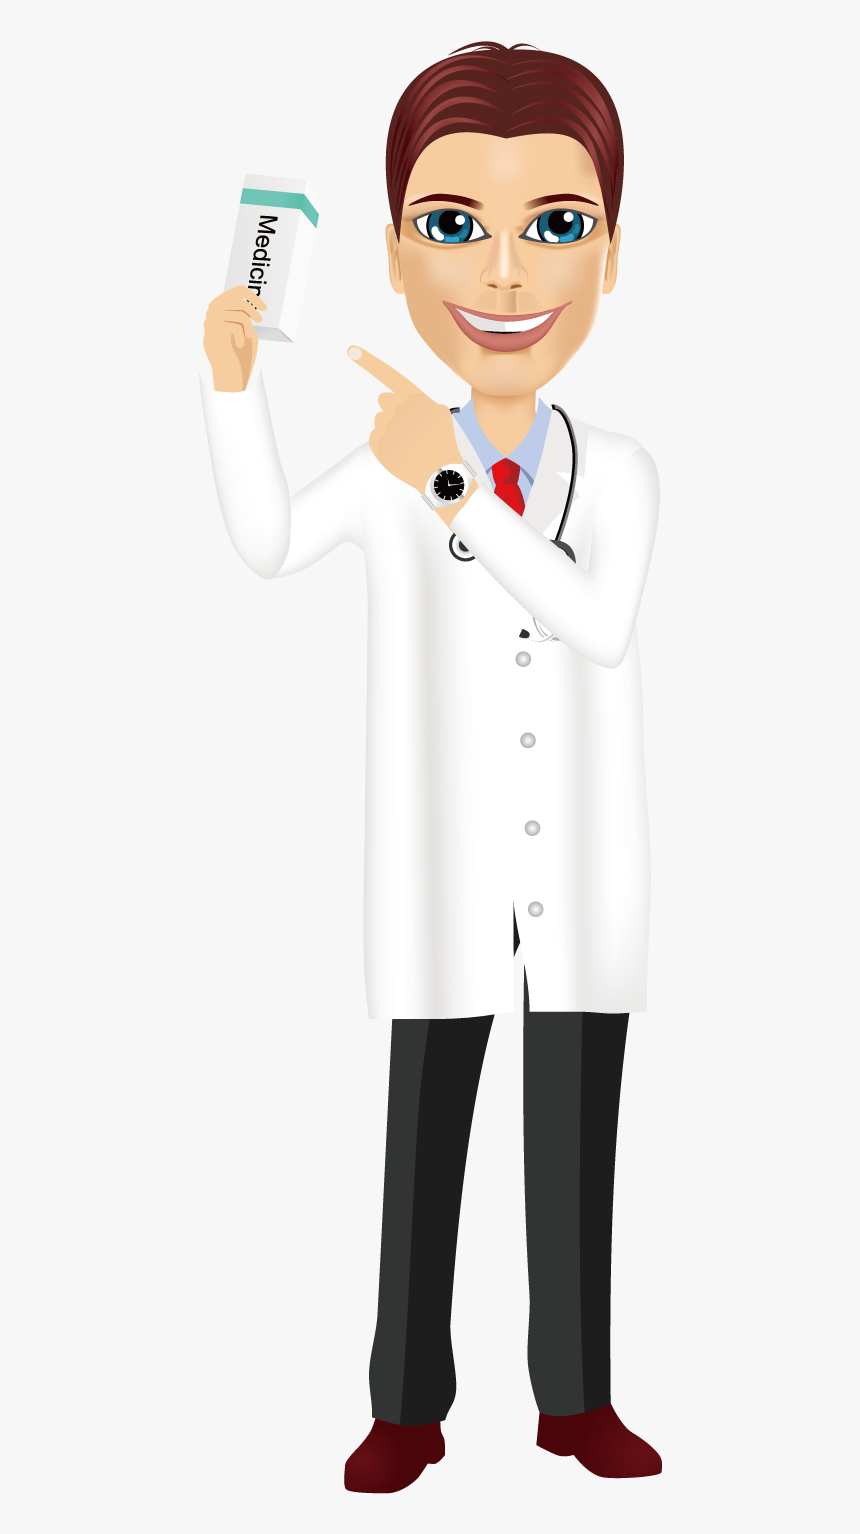 Cute boy doctor stock vector. Illustration of clinic - 17055469